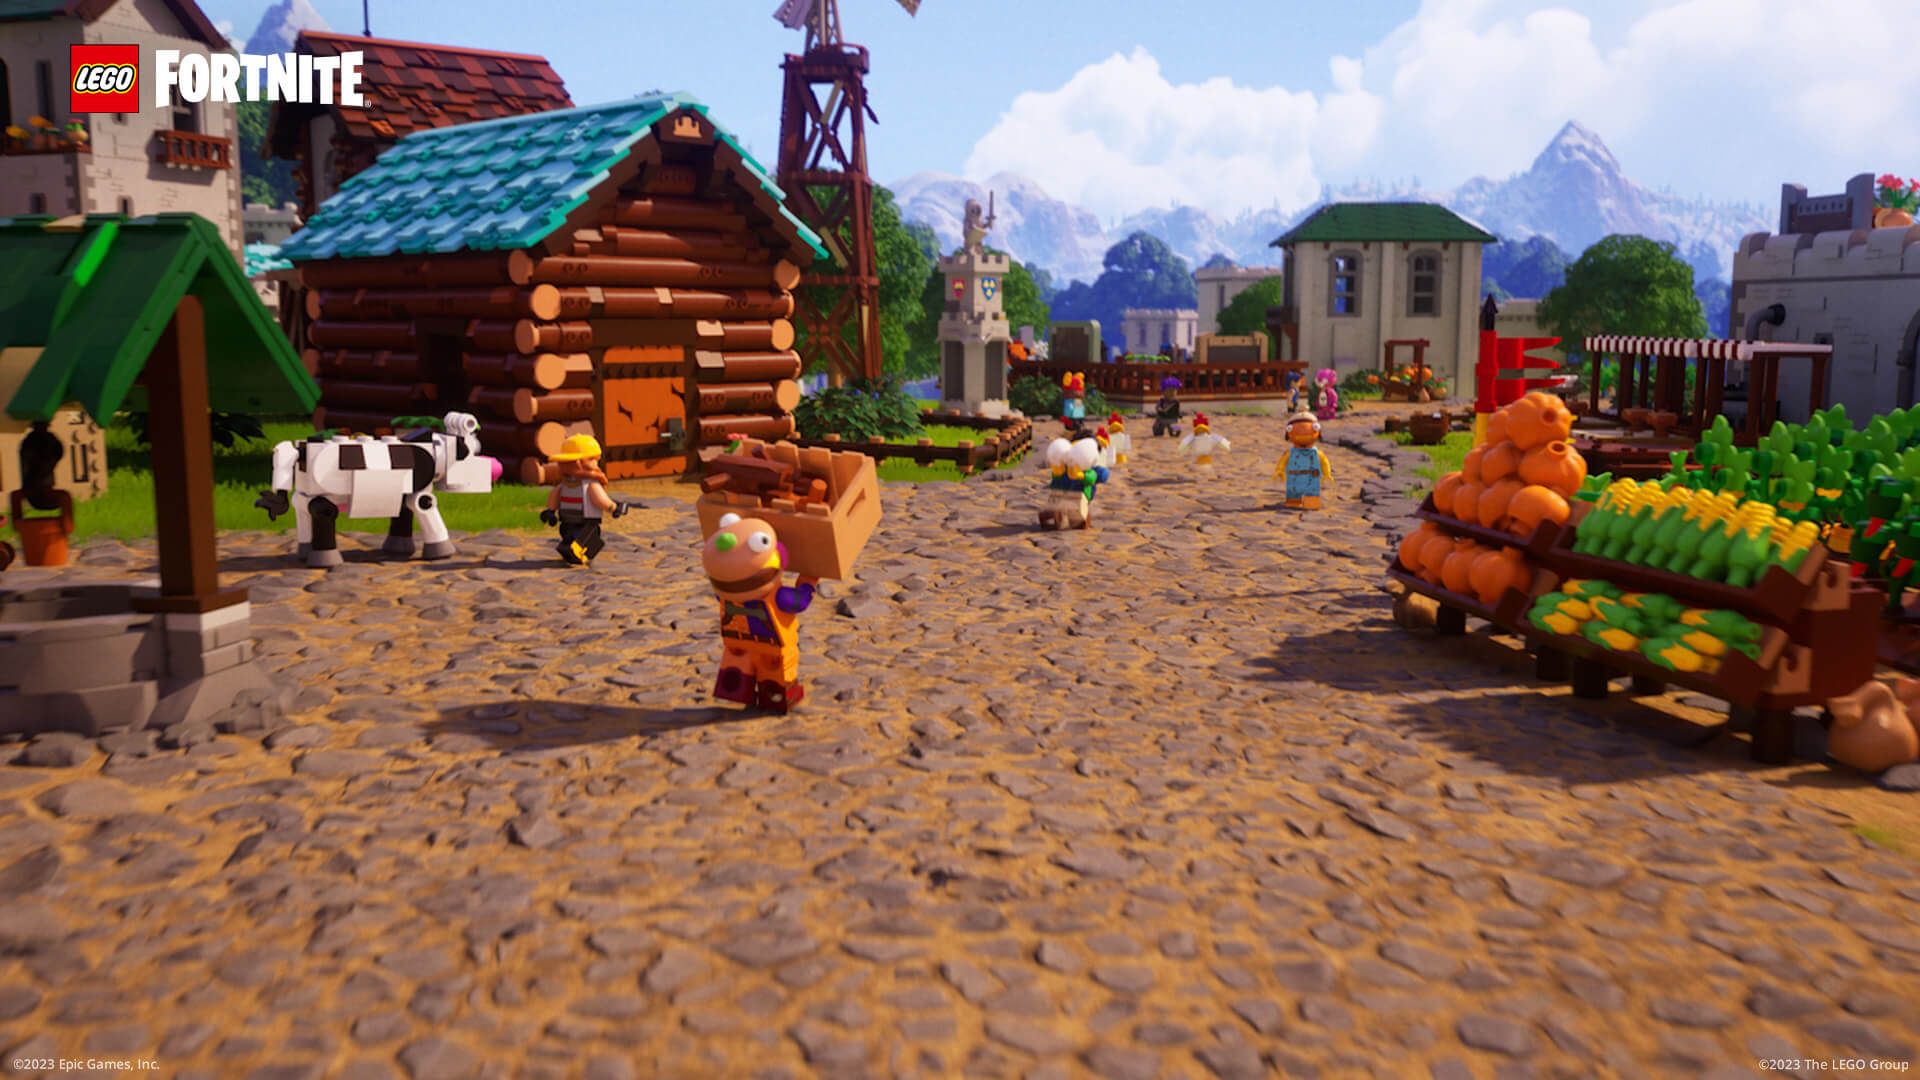 A Lego Fortnite village with a cow, people, and chickens.